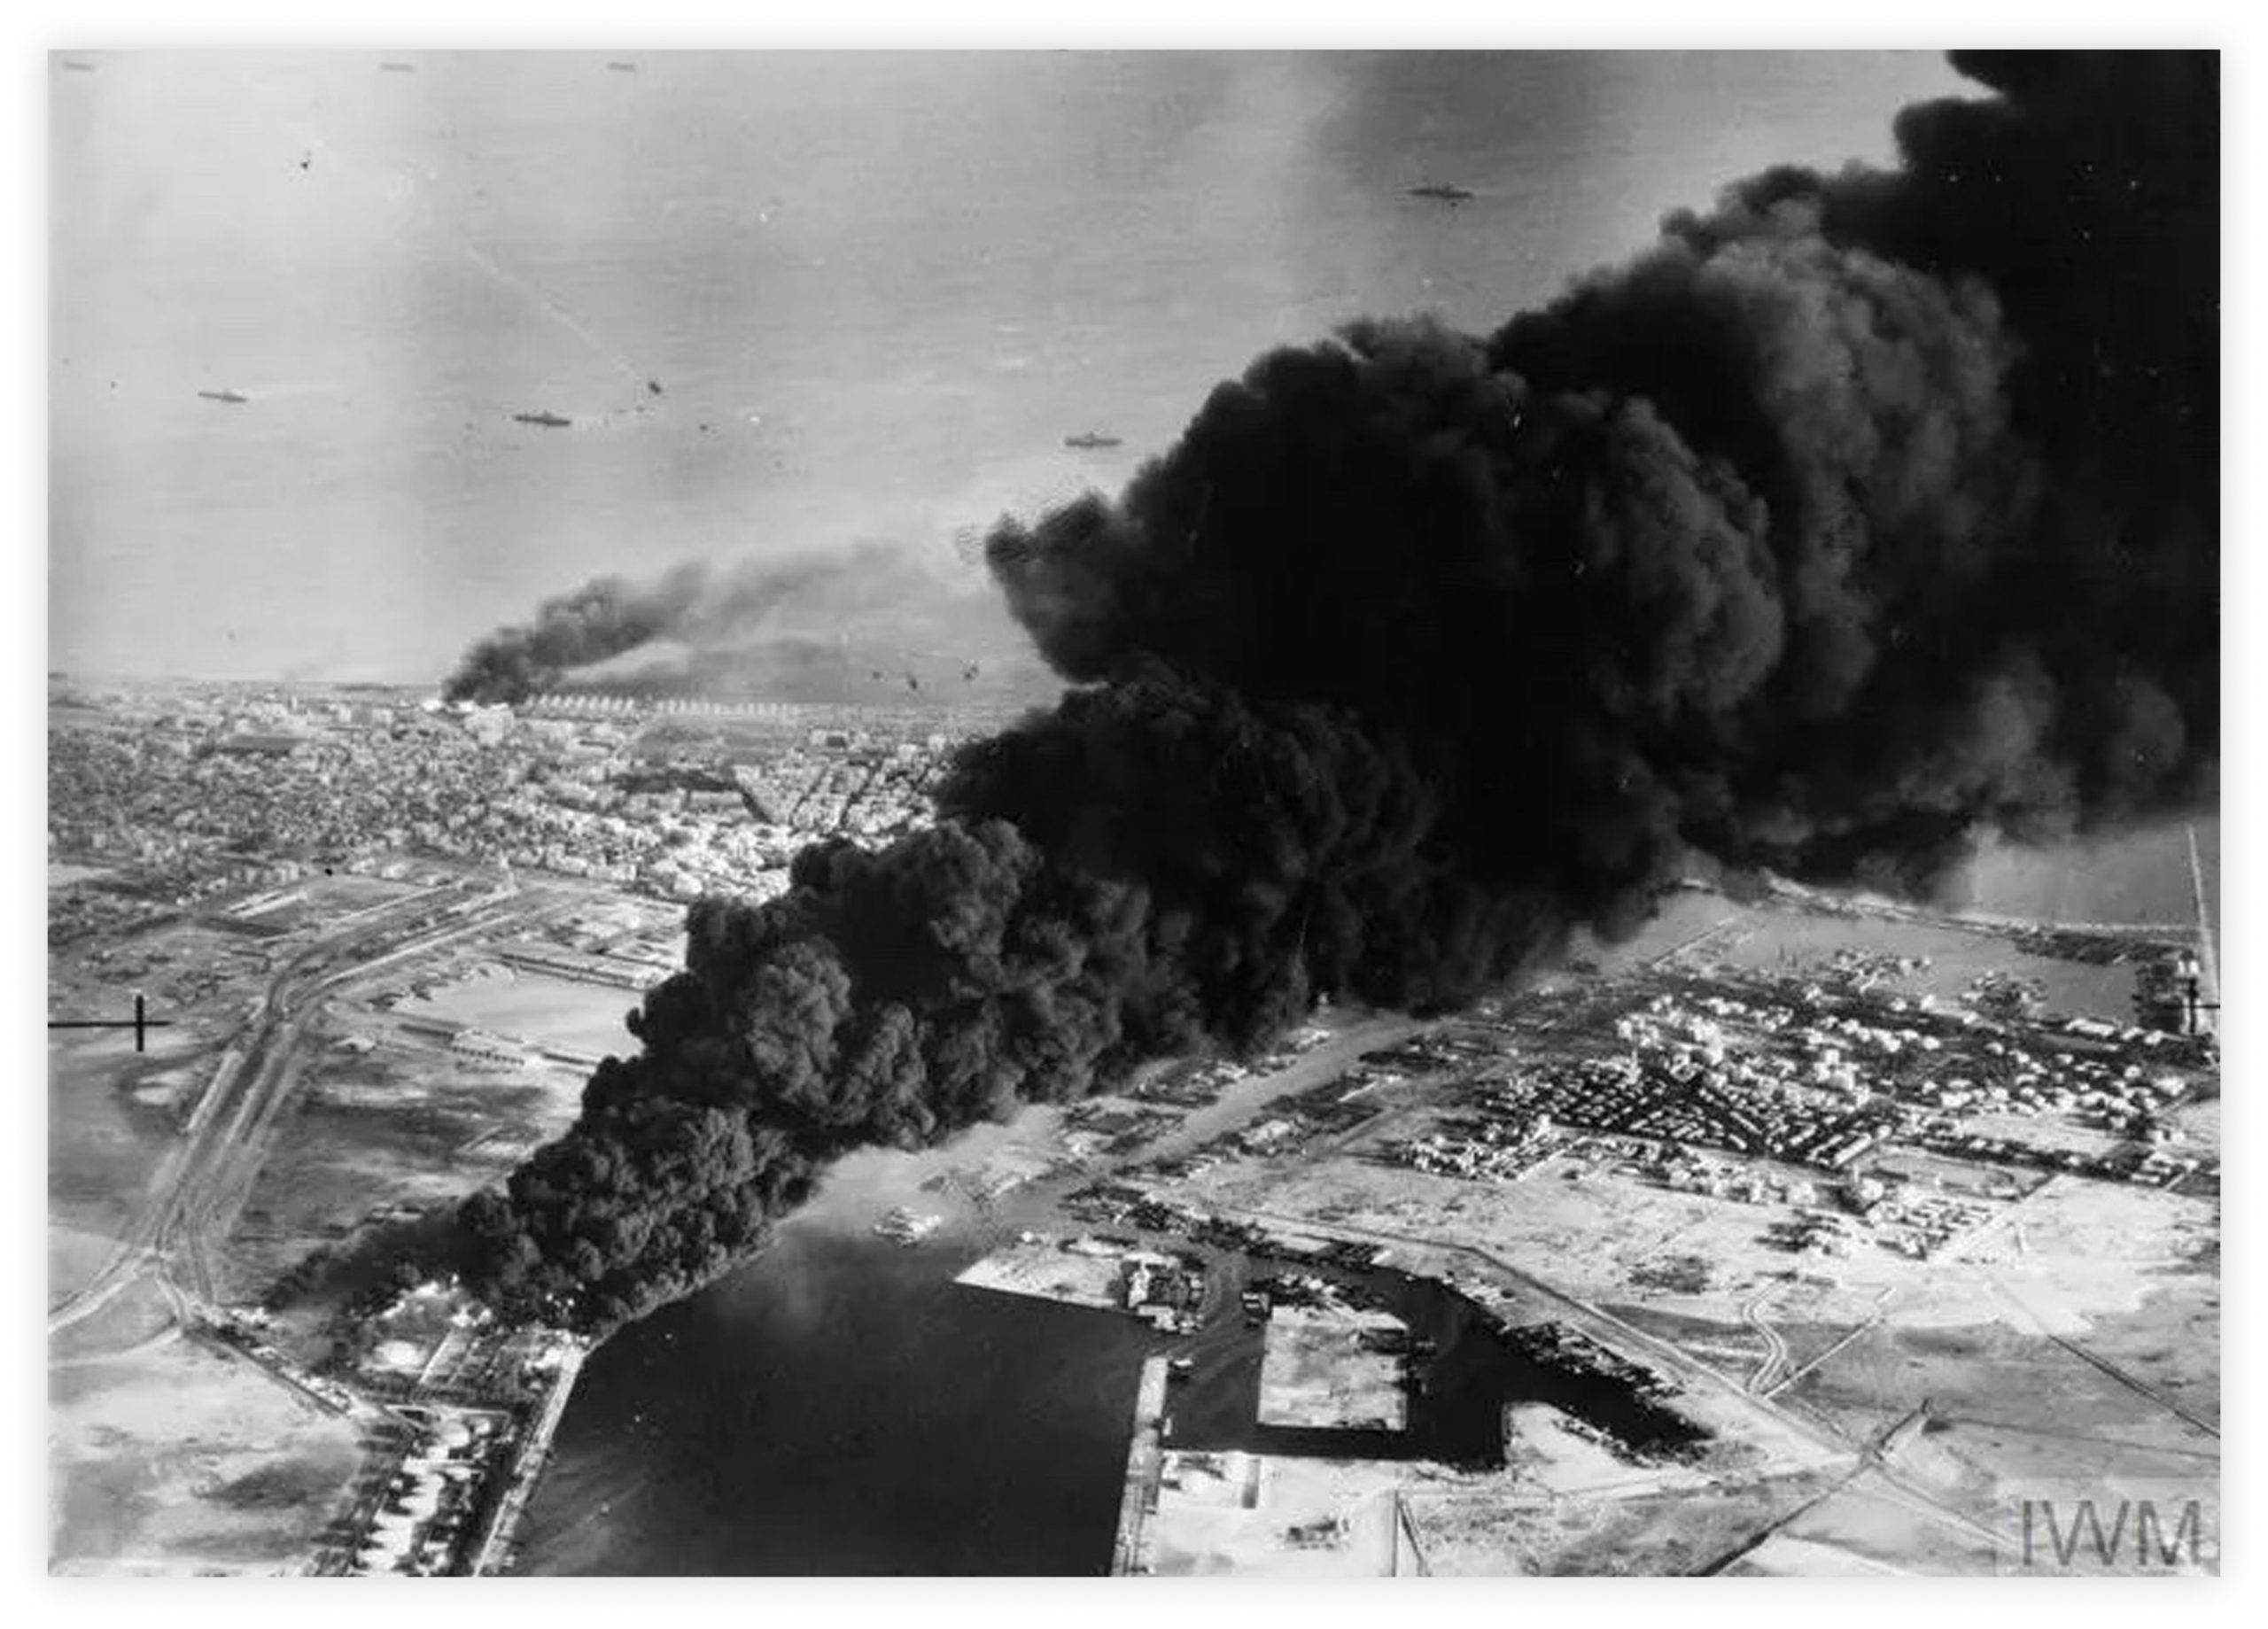 Smoke rises from oil tanks beside the Suez Canal hit during the initial Anglo-French assault on Port Said in 1956.